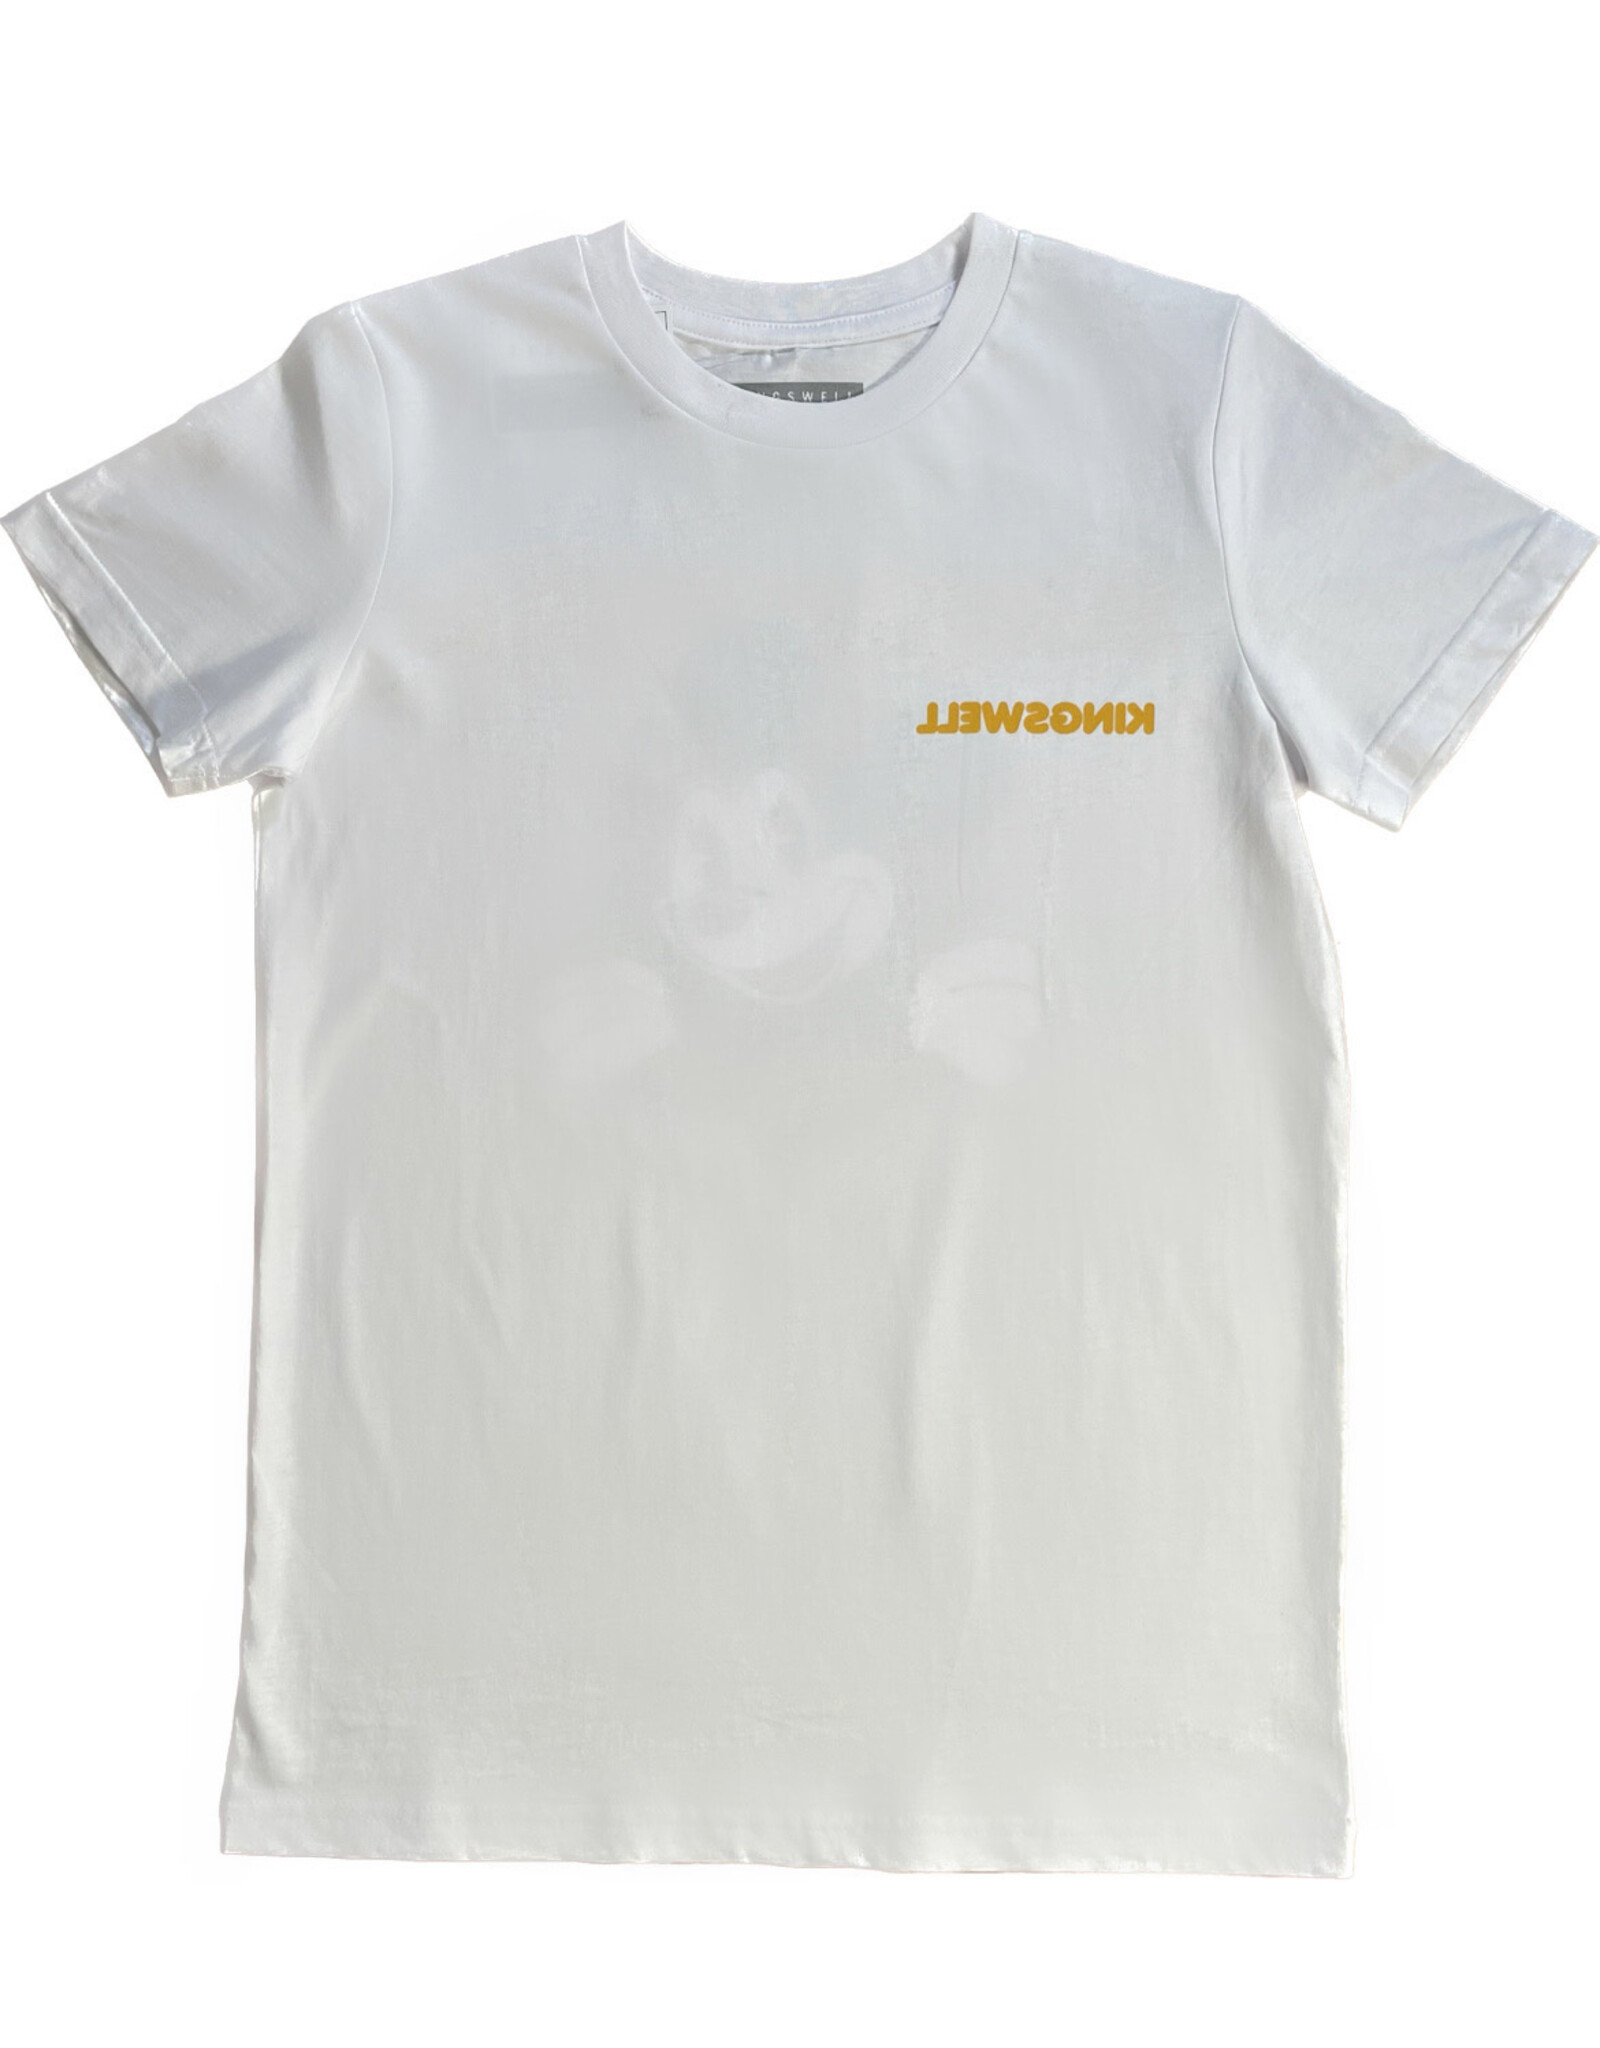 KINGSWELL KINGSWELL YOUTH RIPPER TEE - WHITE